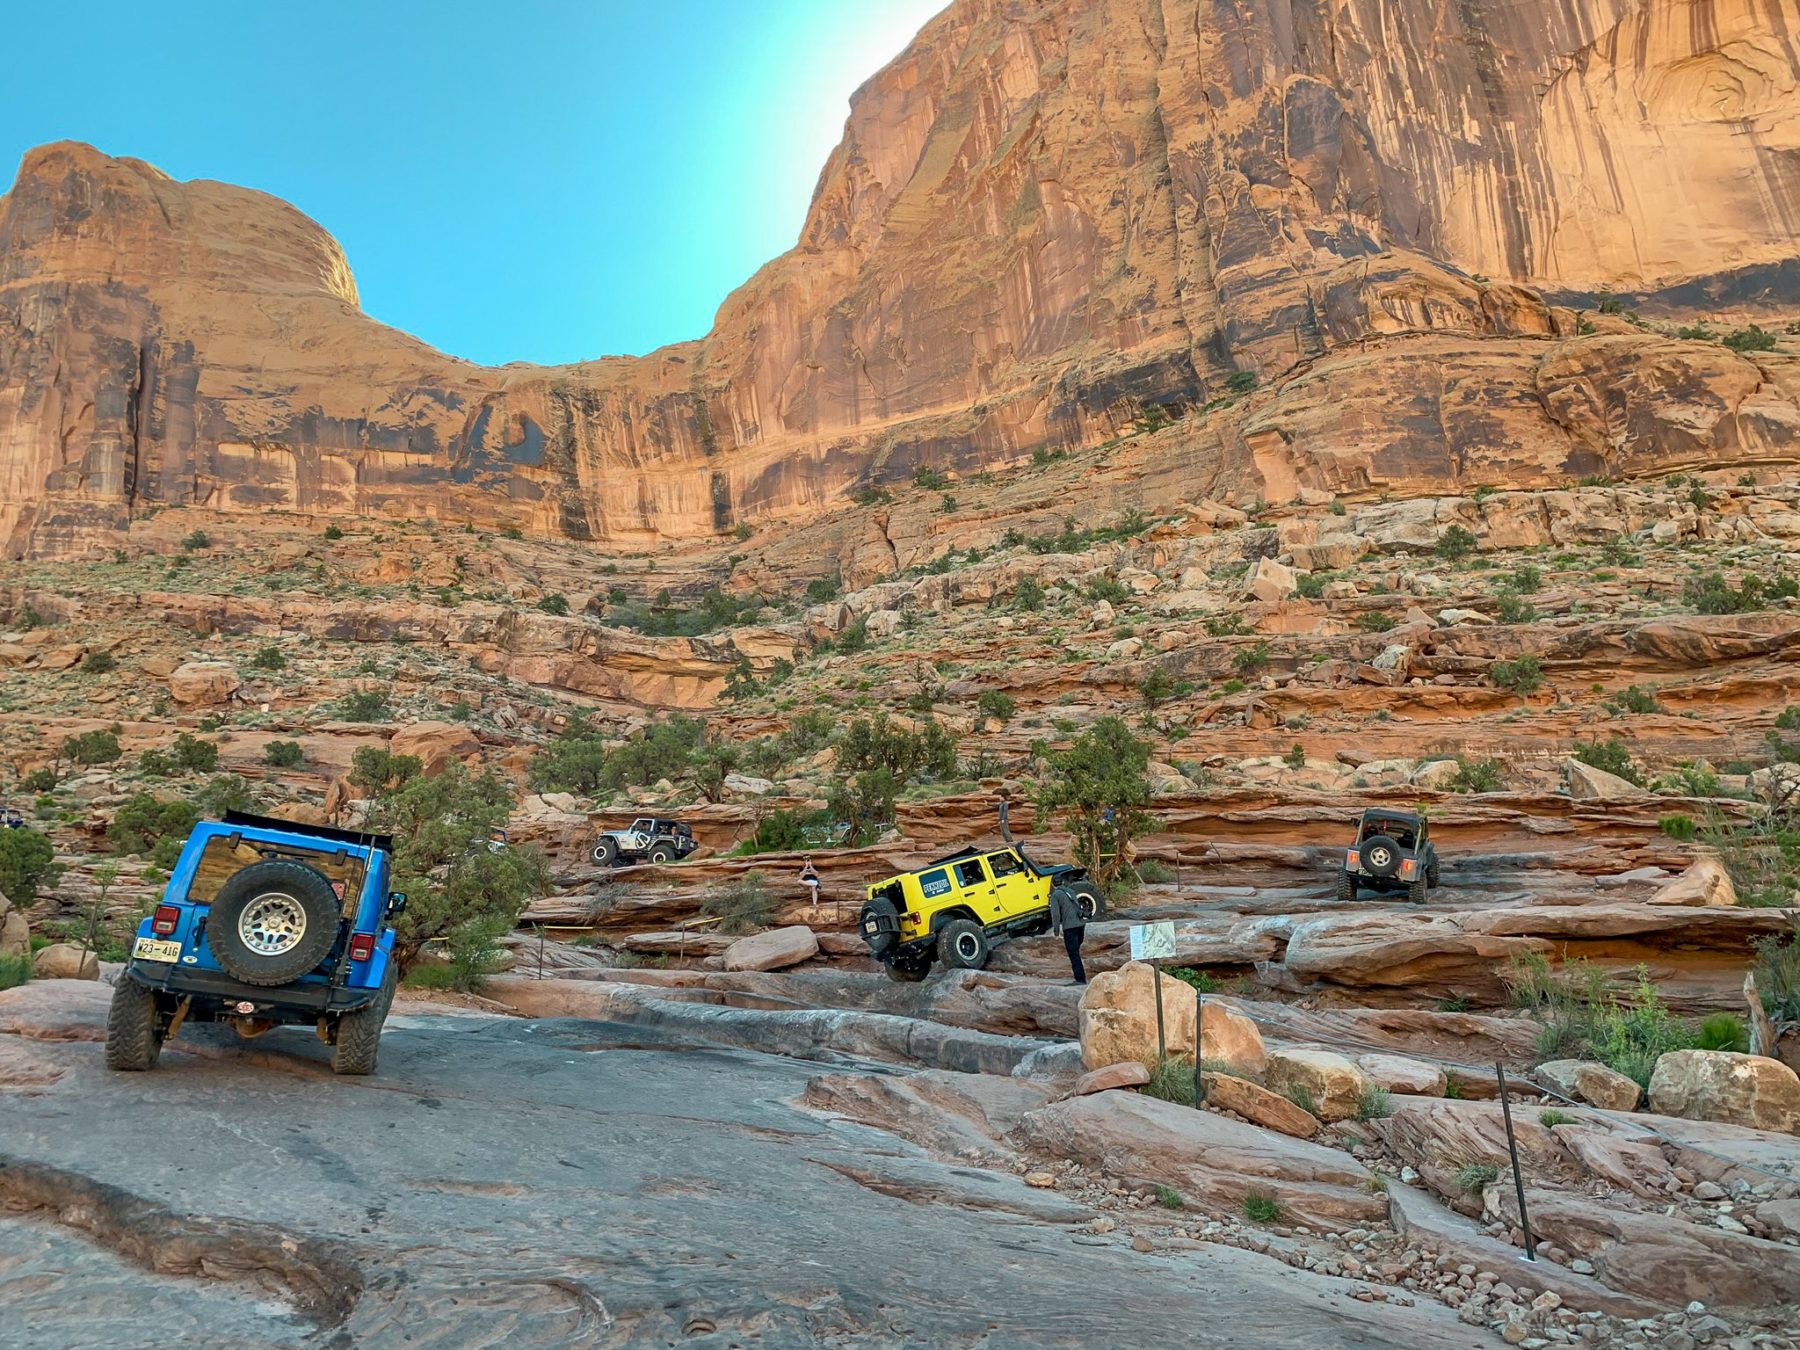 A yellow Jeep rides along an off-road track near the Grand Canyon.